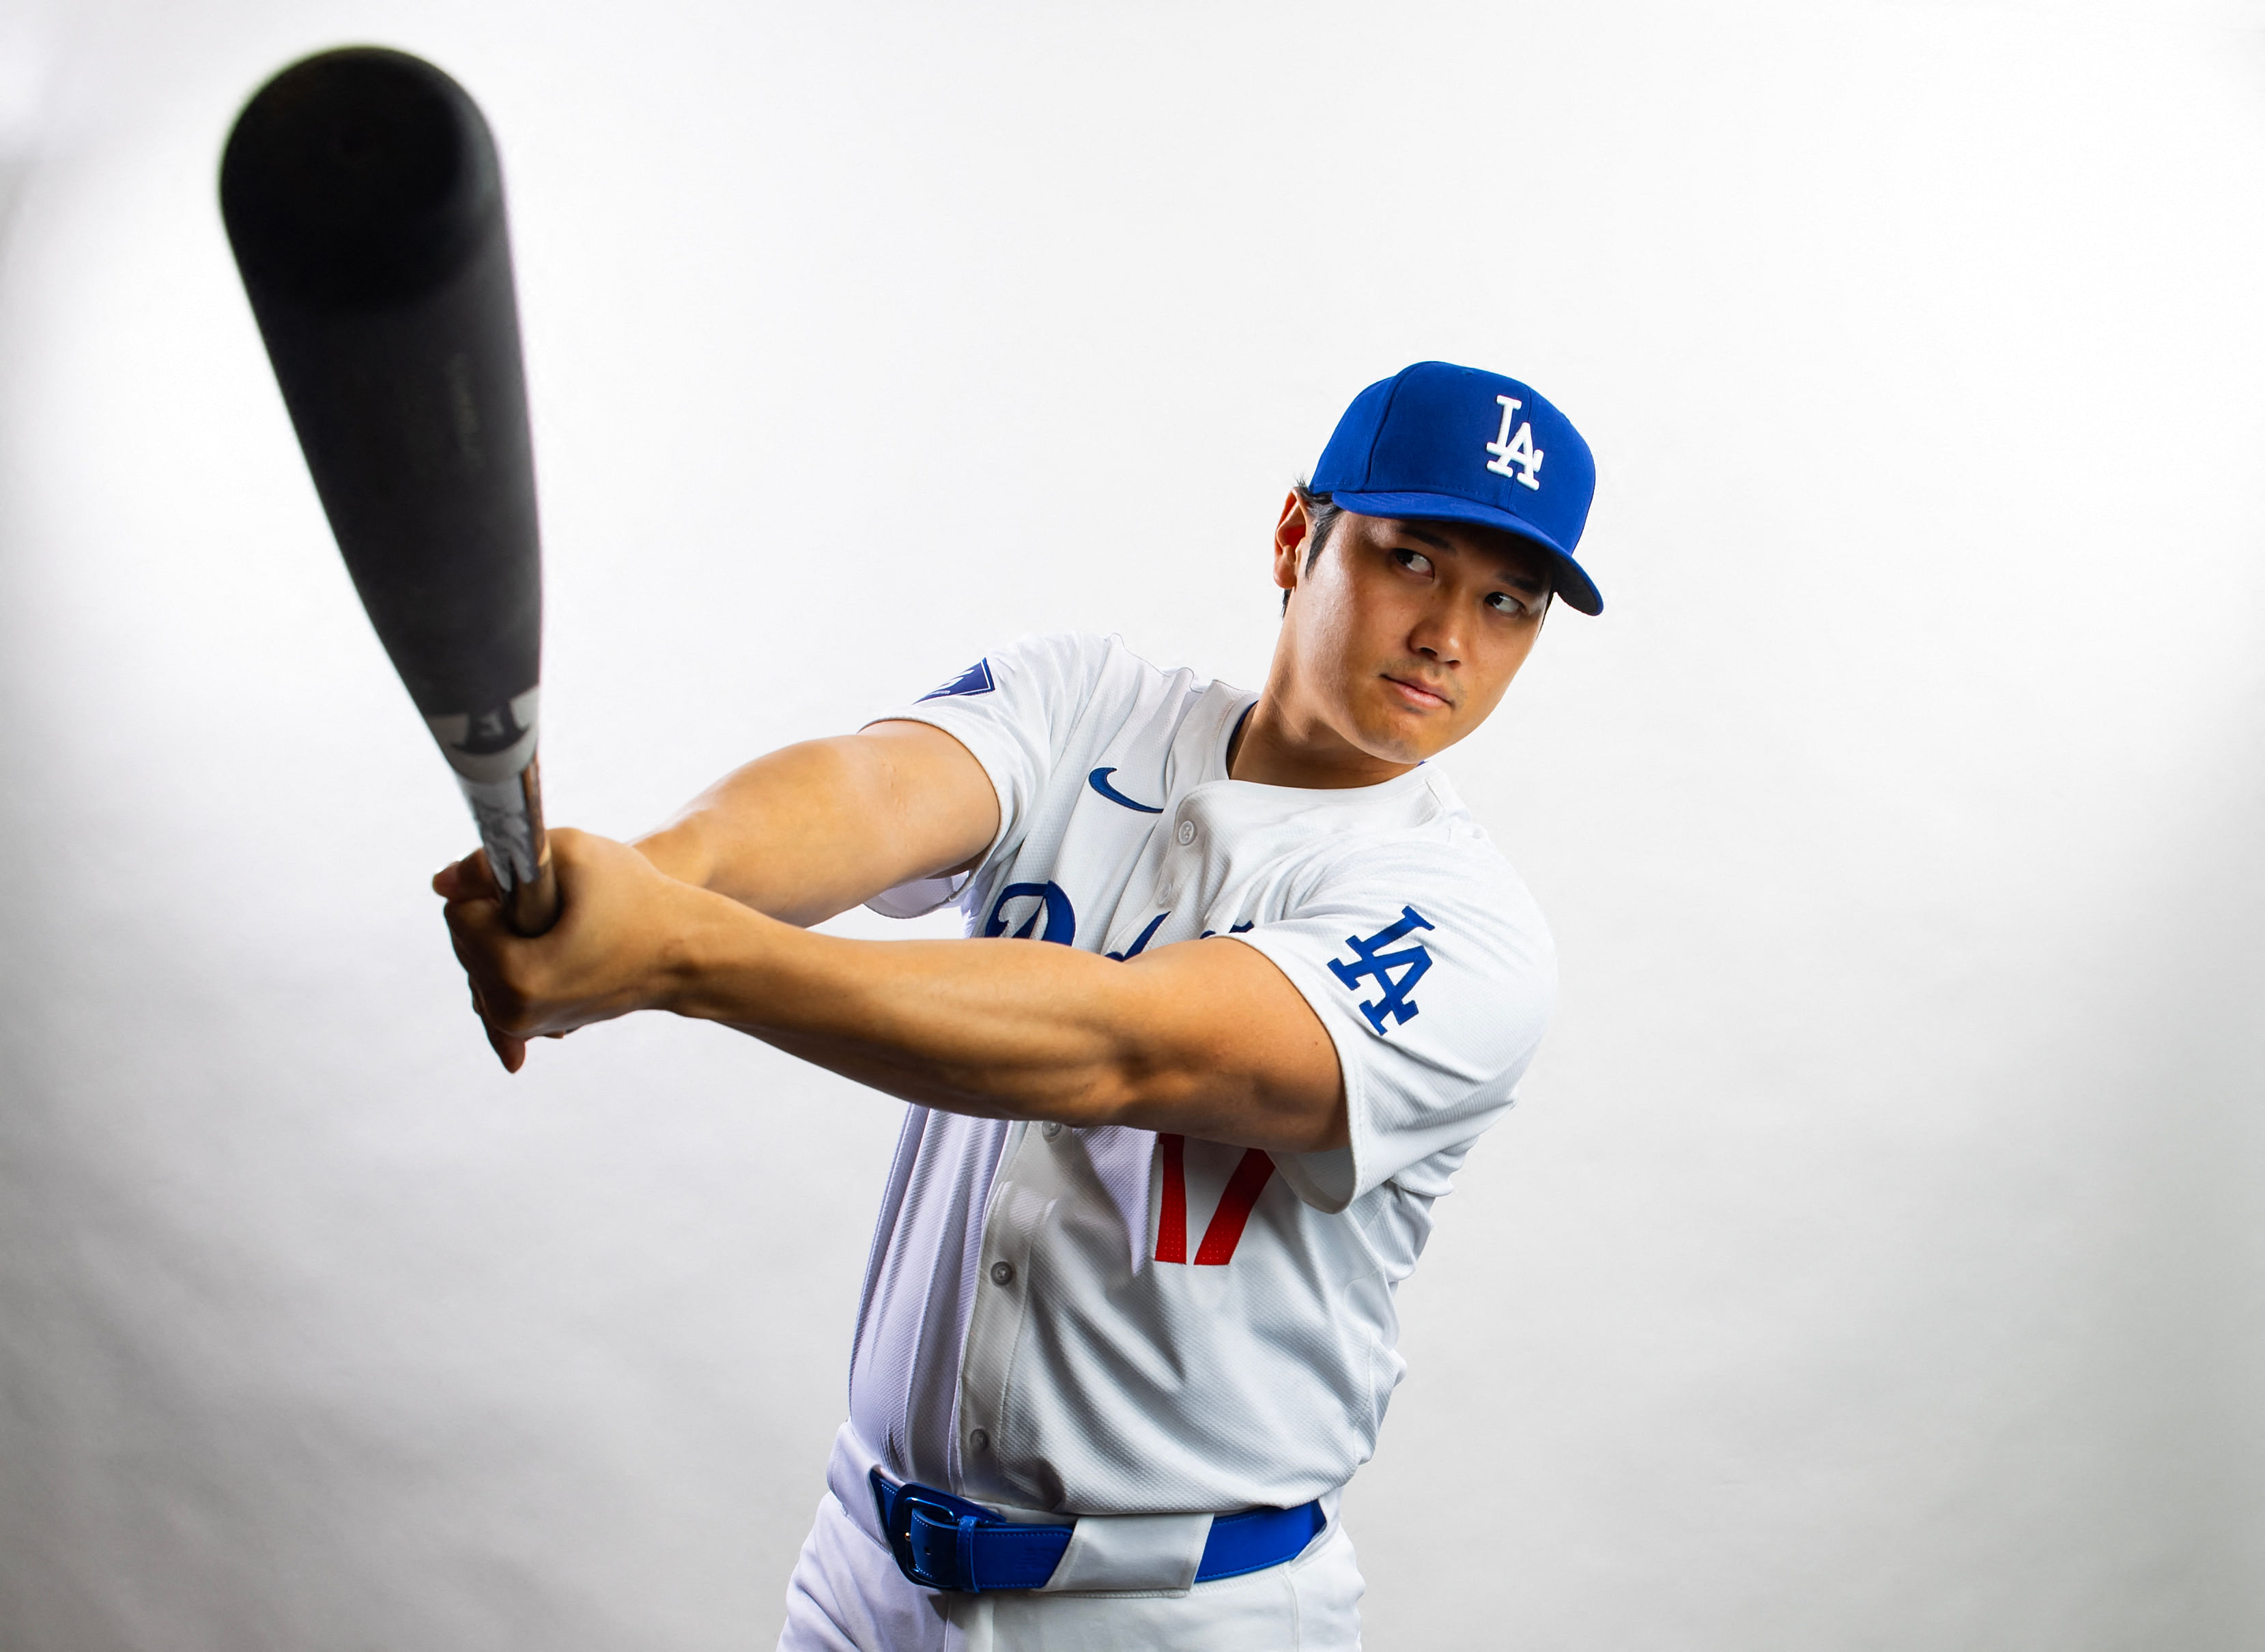 Shohei Ohtani to make spring debut for the Los Angeles Dodgers on Feb 27